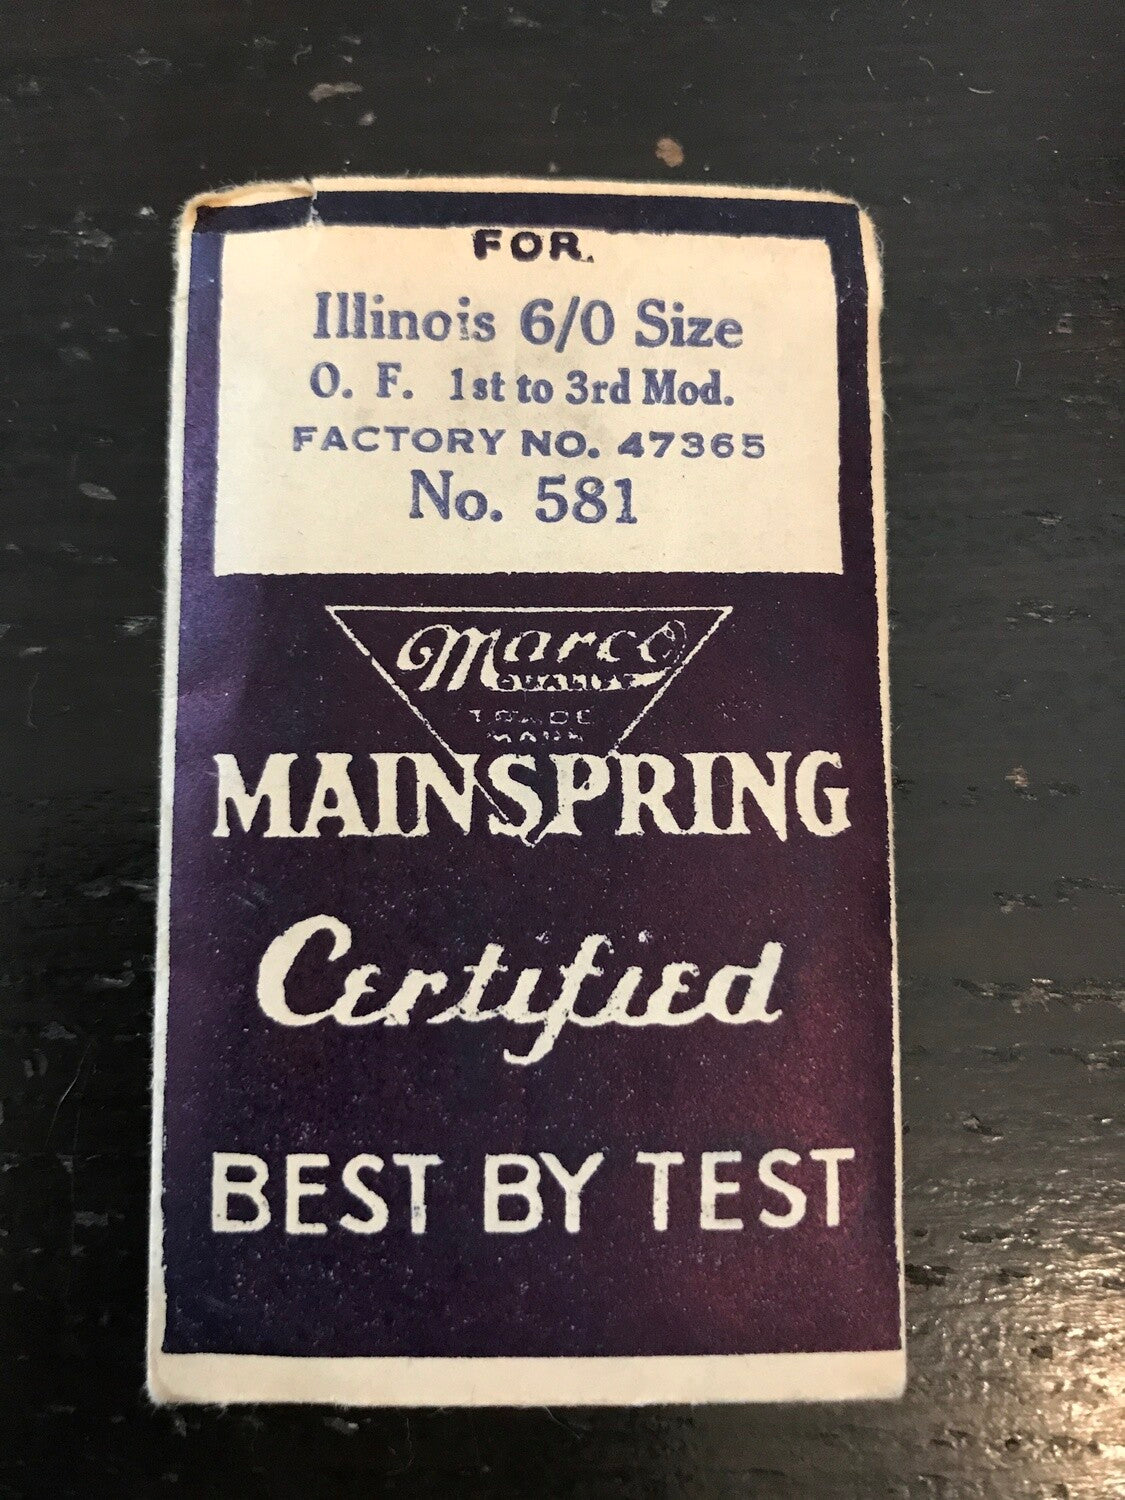 Marco Mainspring #581 for 6/0s Illinois Factory No. 47365 - Steel